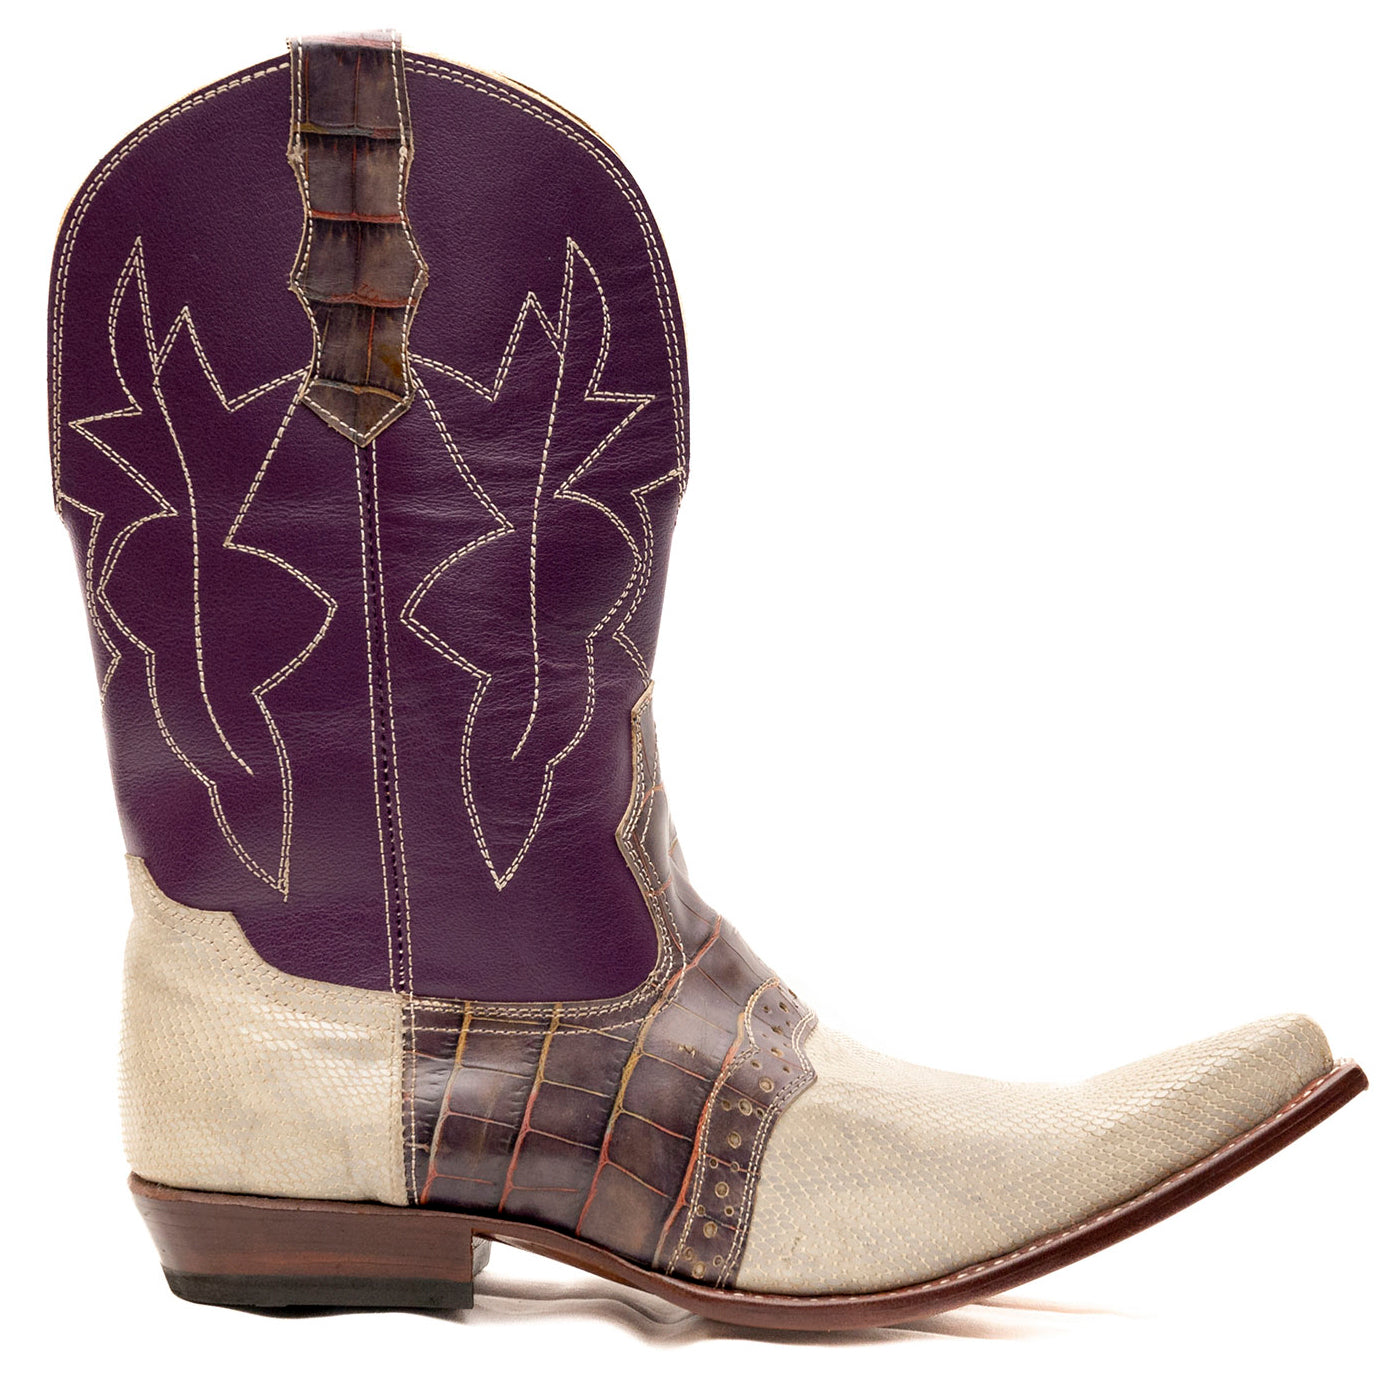 Mexican Double Stitched Cowboy Boots with perforations